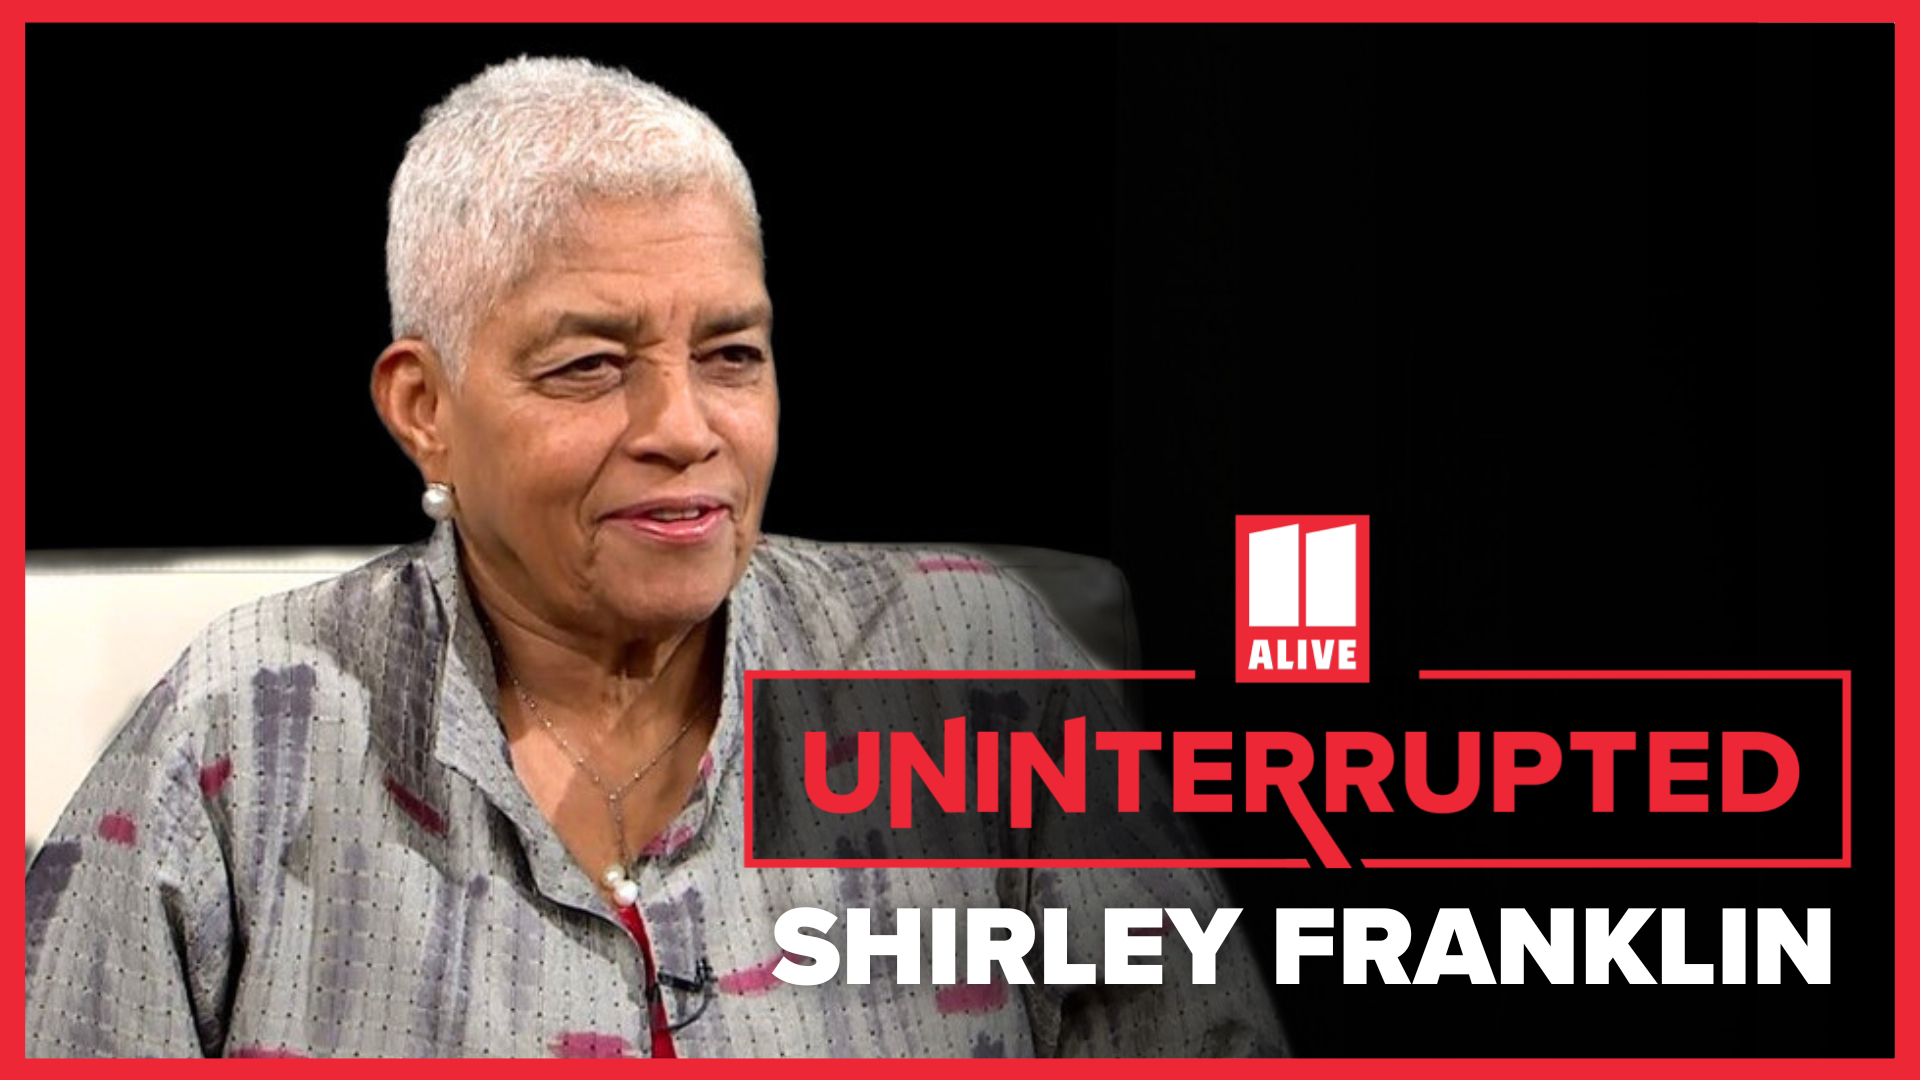 11Alive Uninterrupted brings you in-depth conversations with influential thought leaders in Atlanta. We sat down with former Atlanta Mayor Shirley Franklin.